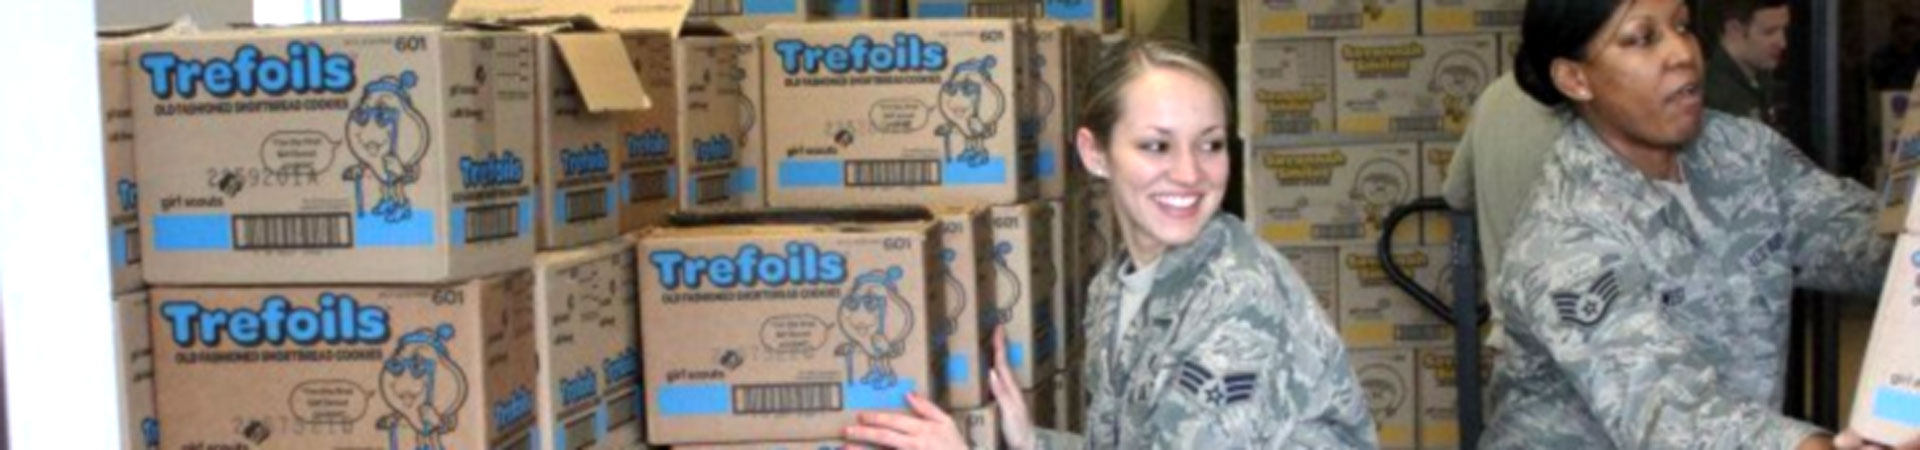  Two women dressed in military fatigues in a storeroom are surrounded by cases of Girl Scout Cookies. 